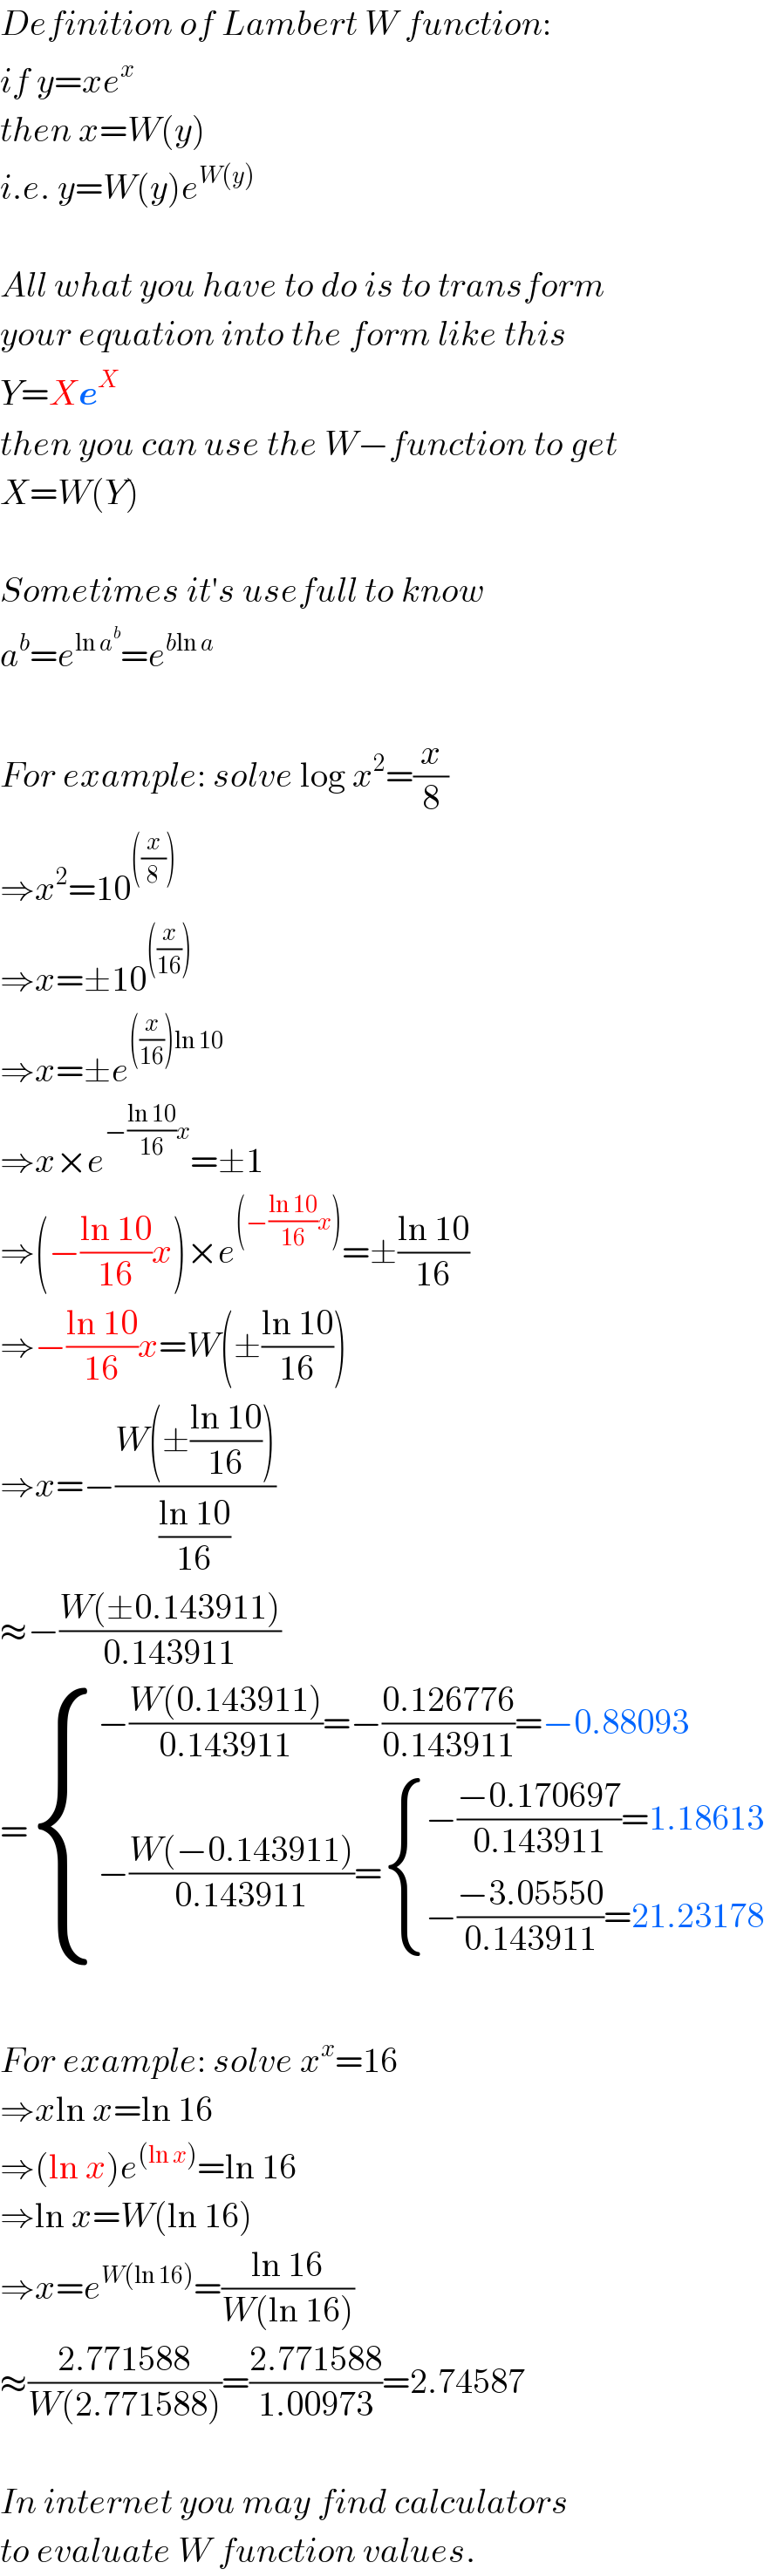 Definition of Lambert W function:  if y=xe^x   then x=W(y)  i.e. y=W(y)e^(W(y))     All what you have to do is to transform  your equation into the form like this  Y=Xe^X   then you can use the W−function to get  X=W(Y)    Sometimes it′s usefull to know   a^b =e^(ln a^b ) =e^(bln a)     For example: solve log x^2 =(x/8)  ⇒x^2 =10^(((x/8)))   ⇒x=±10^(((x/(16))))   ⇒x=±e^(((x/(16)))ln 10)   ⇒x×e^(−((ln 10)/(16))x) =±1  ⇒(−((ln 10)/(16))x)×e^((−((ln 10)/(16))x)) =±((ln 10)/(16))  ⇒−((ln 10)/(16))x=W(±((ln 10)/(16)))  ⇒x=−((W(±((ln 10)/(16))))/((ln 10)/(16)))  ≈−((W(±0.143911))/(0.143911))  = { ((−((W(0.143911))/(0.143911))=−((0.126776)/(0.143911))=−0.88093)),((−((W(−0.143911))/(0.143911))= { ((−((−0.170697)/(0.143911))=1.18613)),((−((−3.05550)/(0.143911))=21.23178)) :})) :}    For example: solve x^x =16  ⇒xln x=ln 16  ⇒(ln x)e^((ln x)) =ln 16  ⇒ln x=W(ln 16)  ⇒x=e^(W(ln 16)) =((ln 16)/(W(ln 16)))  ≈((2.771588)/(W(2.771588)))=((2.771588)/(1.00973))=2.74587    In internet you may find calculators  to evaluate W function values.  